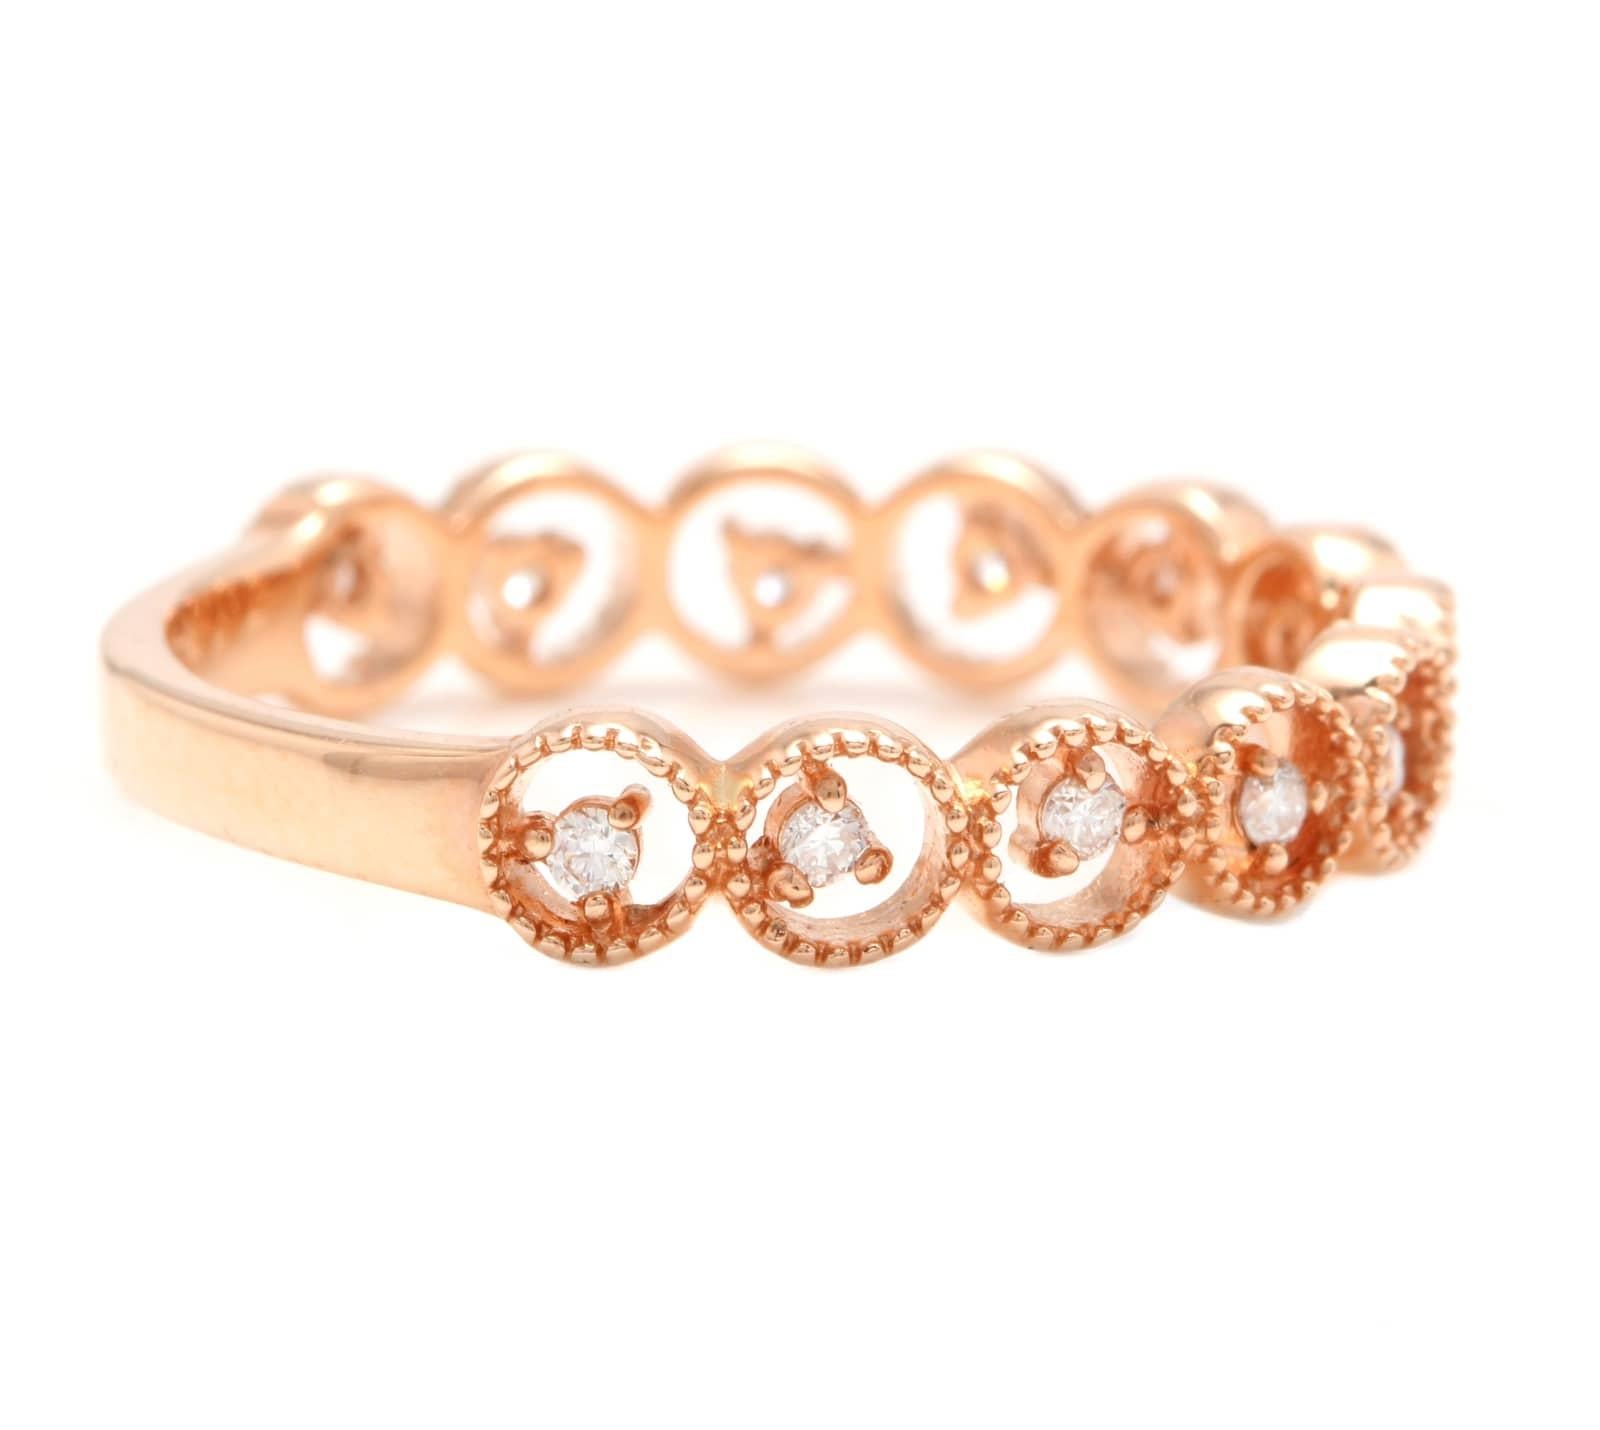 Splendid 0.15 Carats Natural Diamond 14K Solid Rose Gold Ring

Suggested Replacement Value: Approx. $1,300.00

Stamped: 14K

Total Natural Round Cut Diamonds Weight: Approx. 0.15 Carats (color G-H / Clarity SI1-SI2)

The width of the ring is: 3.70mm